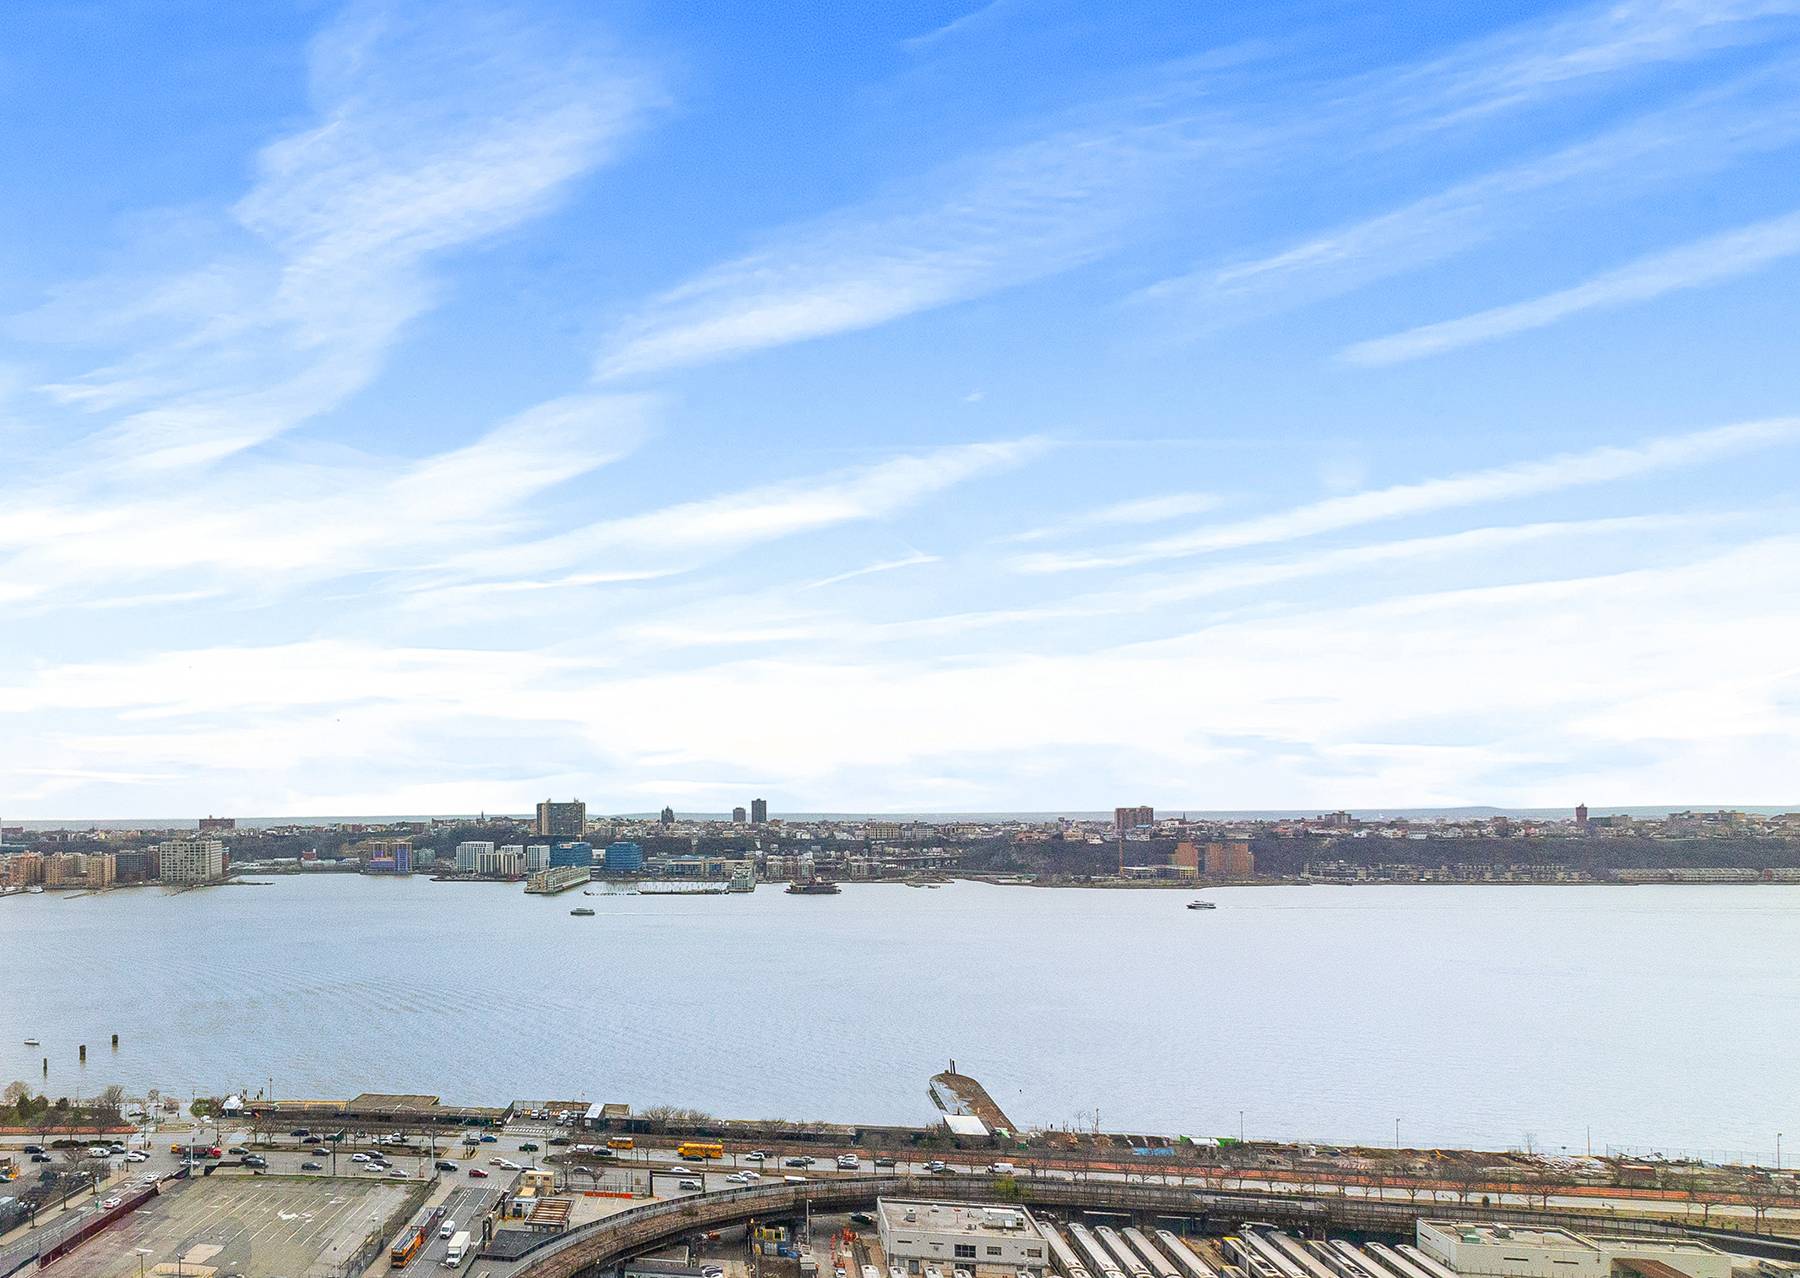 Revel in dramatic sunset views and a high end luxury lifestyle in this stunning 1 bedroom, 1 bathroom condo in Hudson Yards.